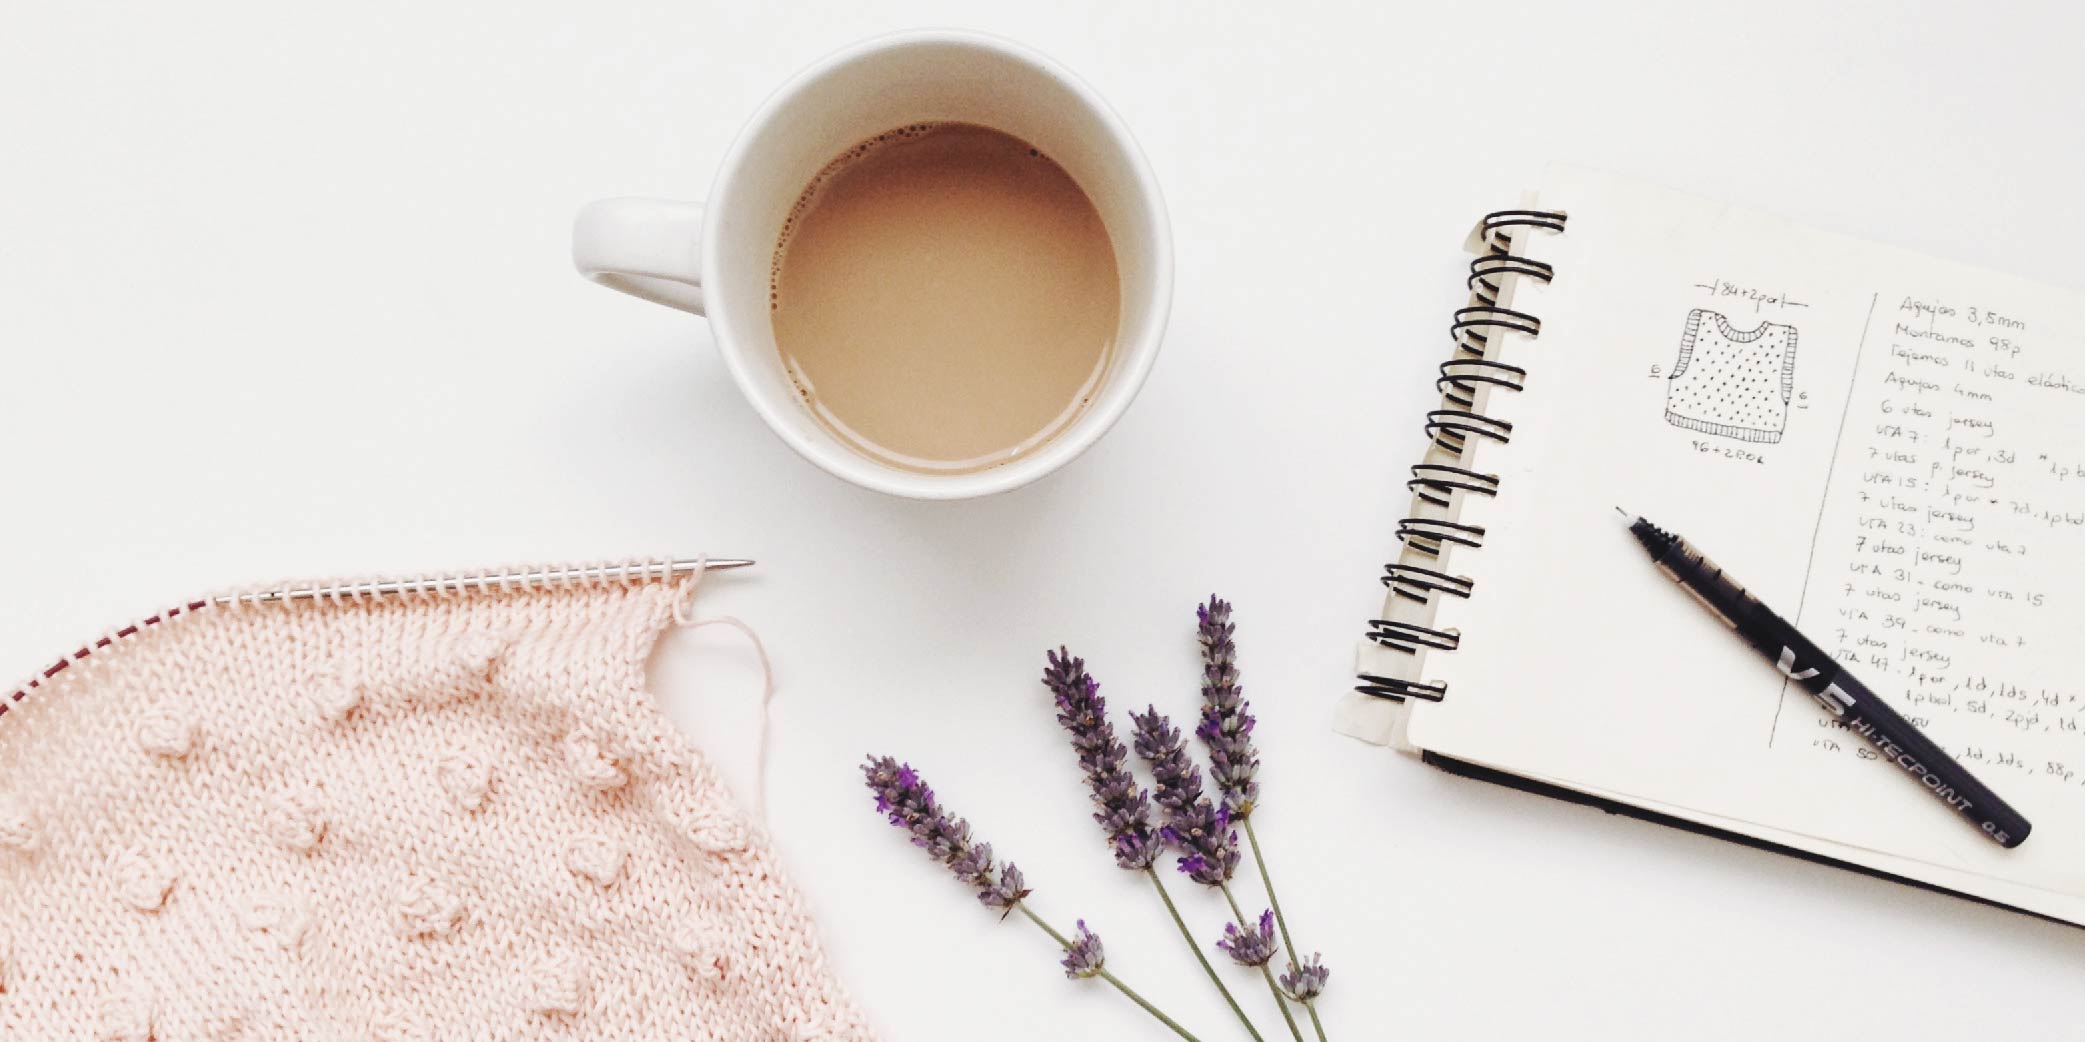 Knitting project, a notebook, cup of coffee, and dried lavender resting on a white surface